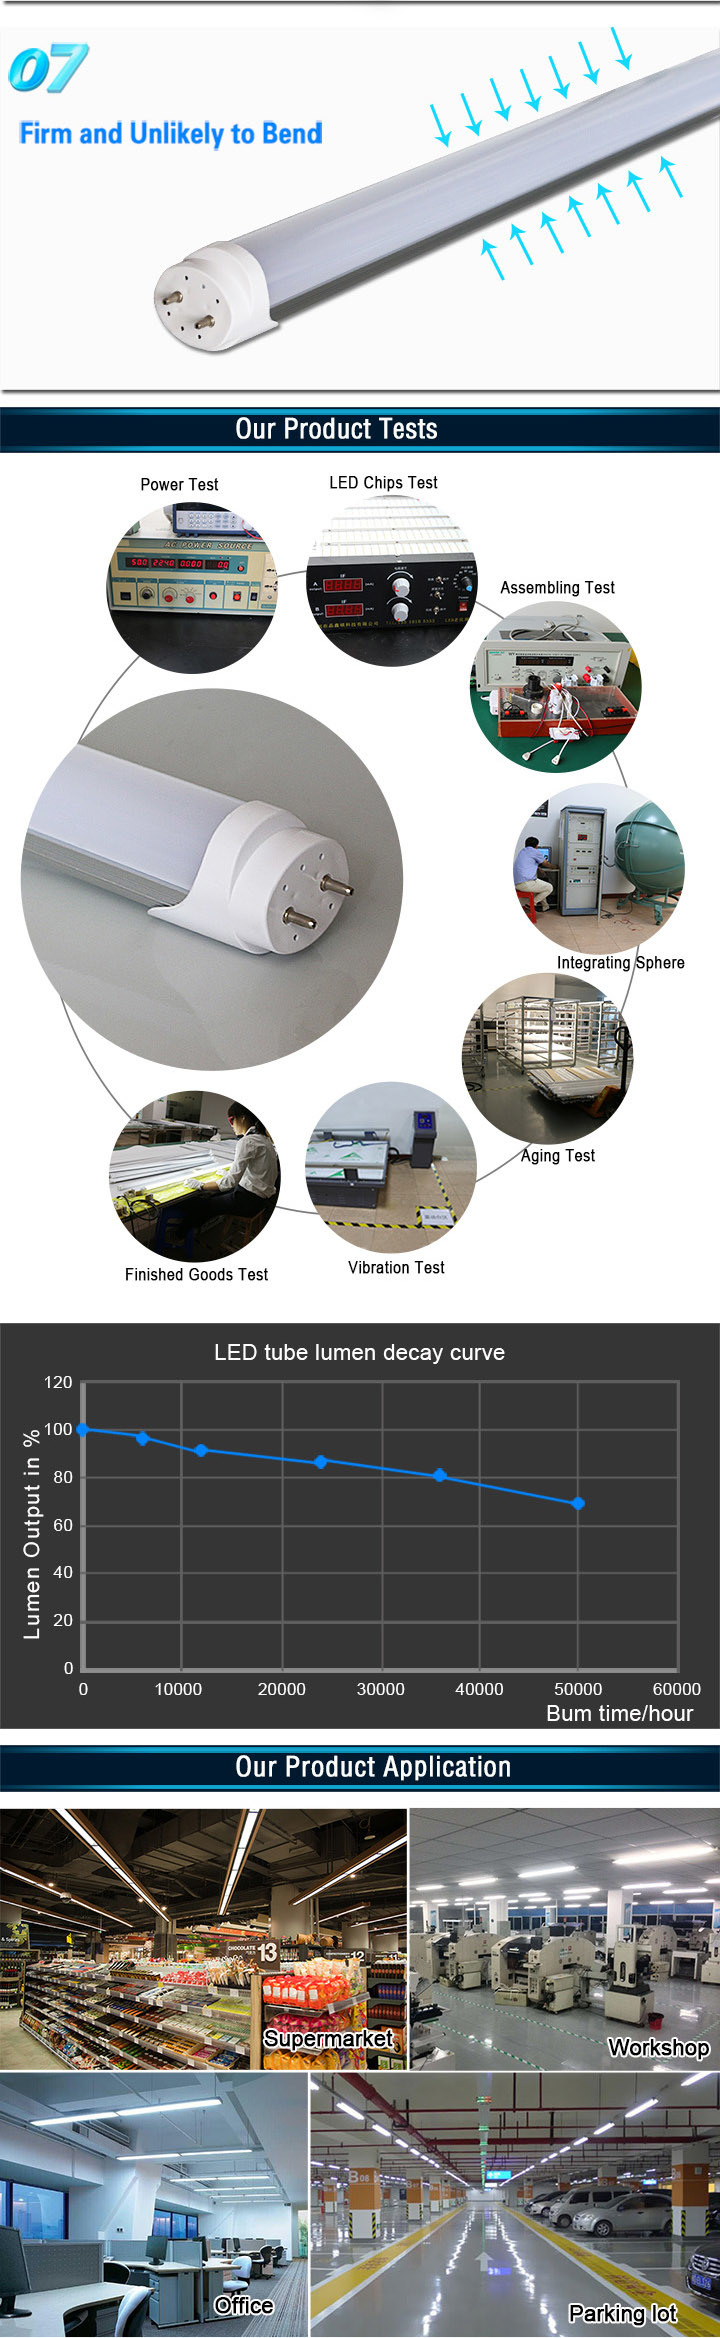 3 Years Warranty 120lm/W 18W Ce RoHS Approval T8 LED Tube Lighting for Supermarket, Parking Lot, Office, Work Shop